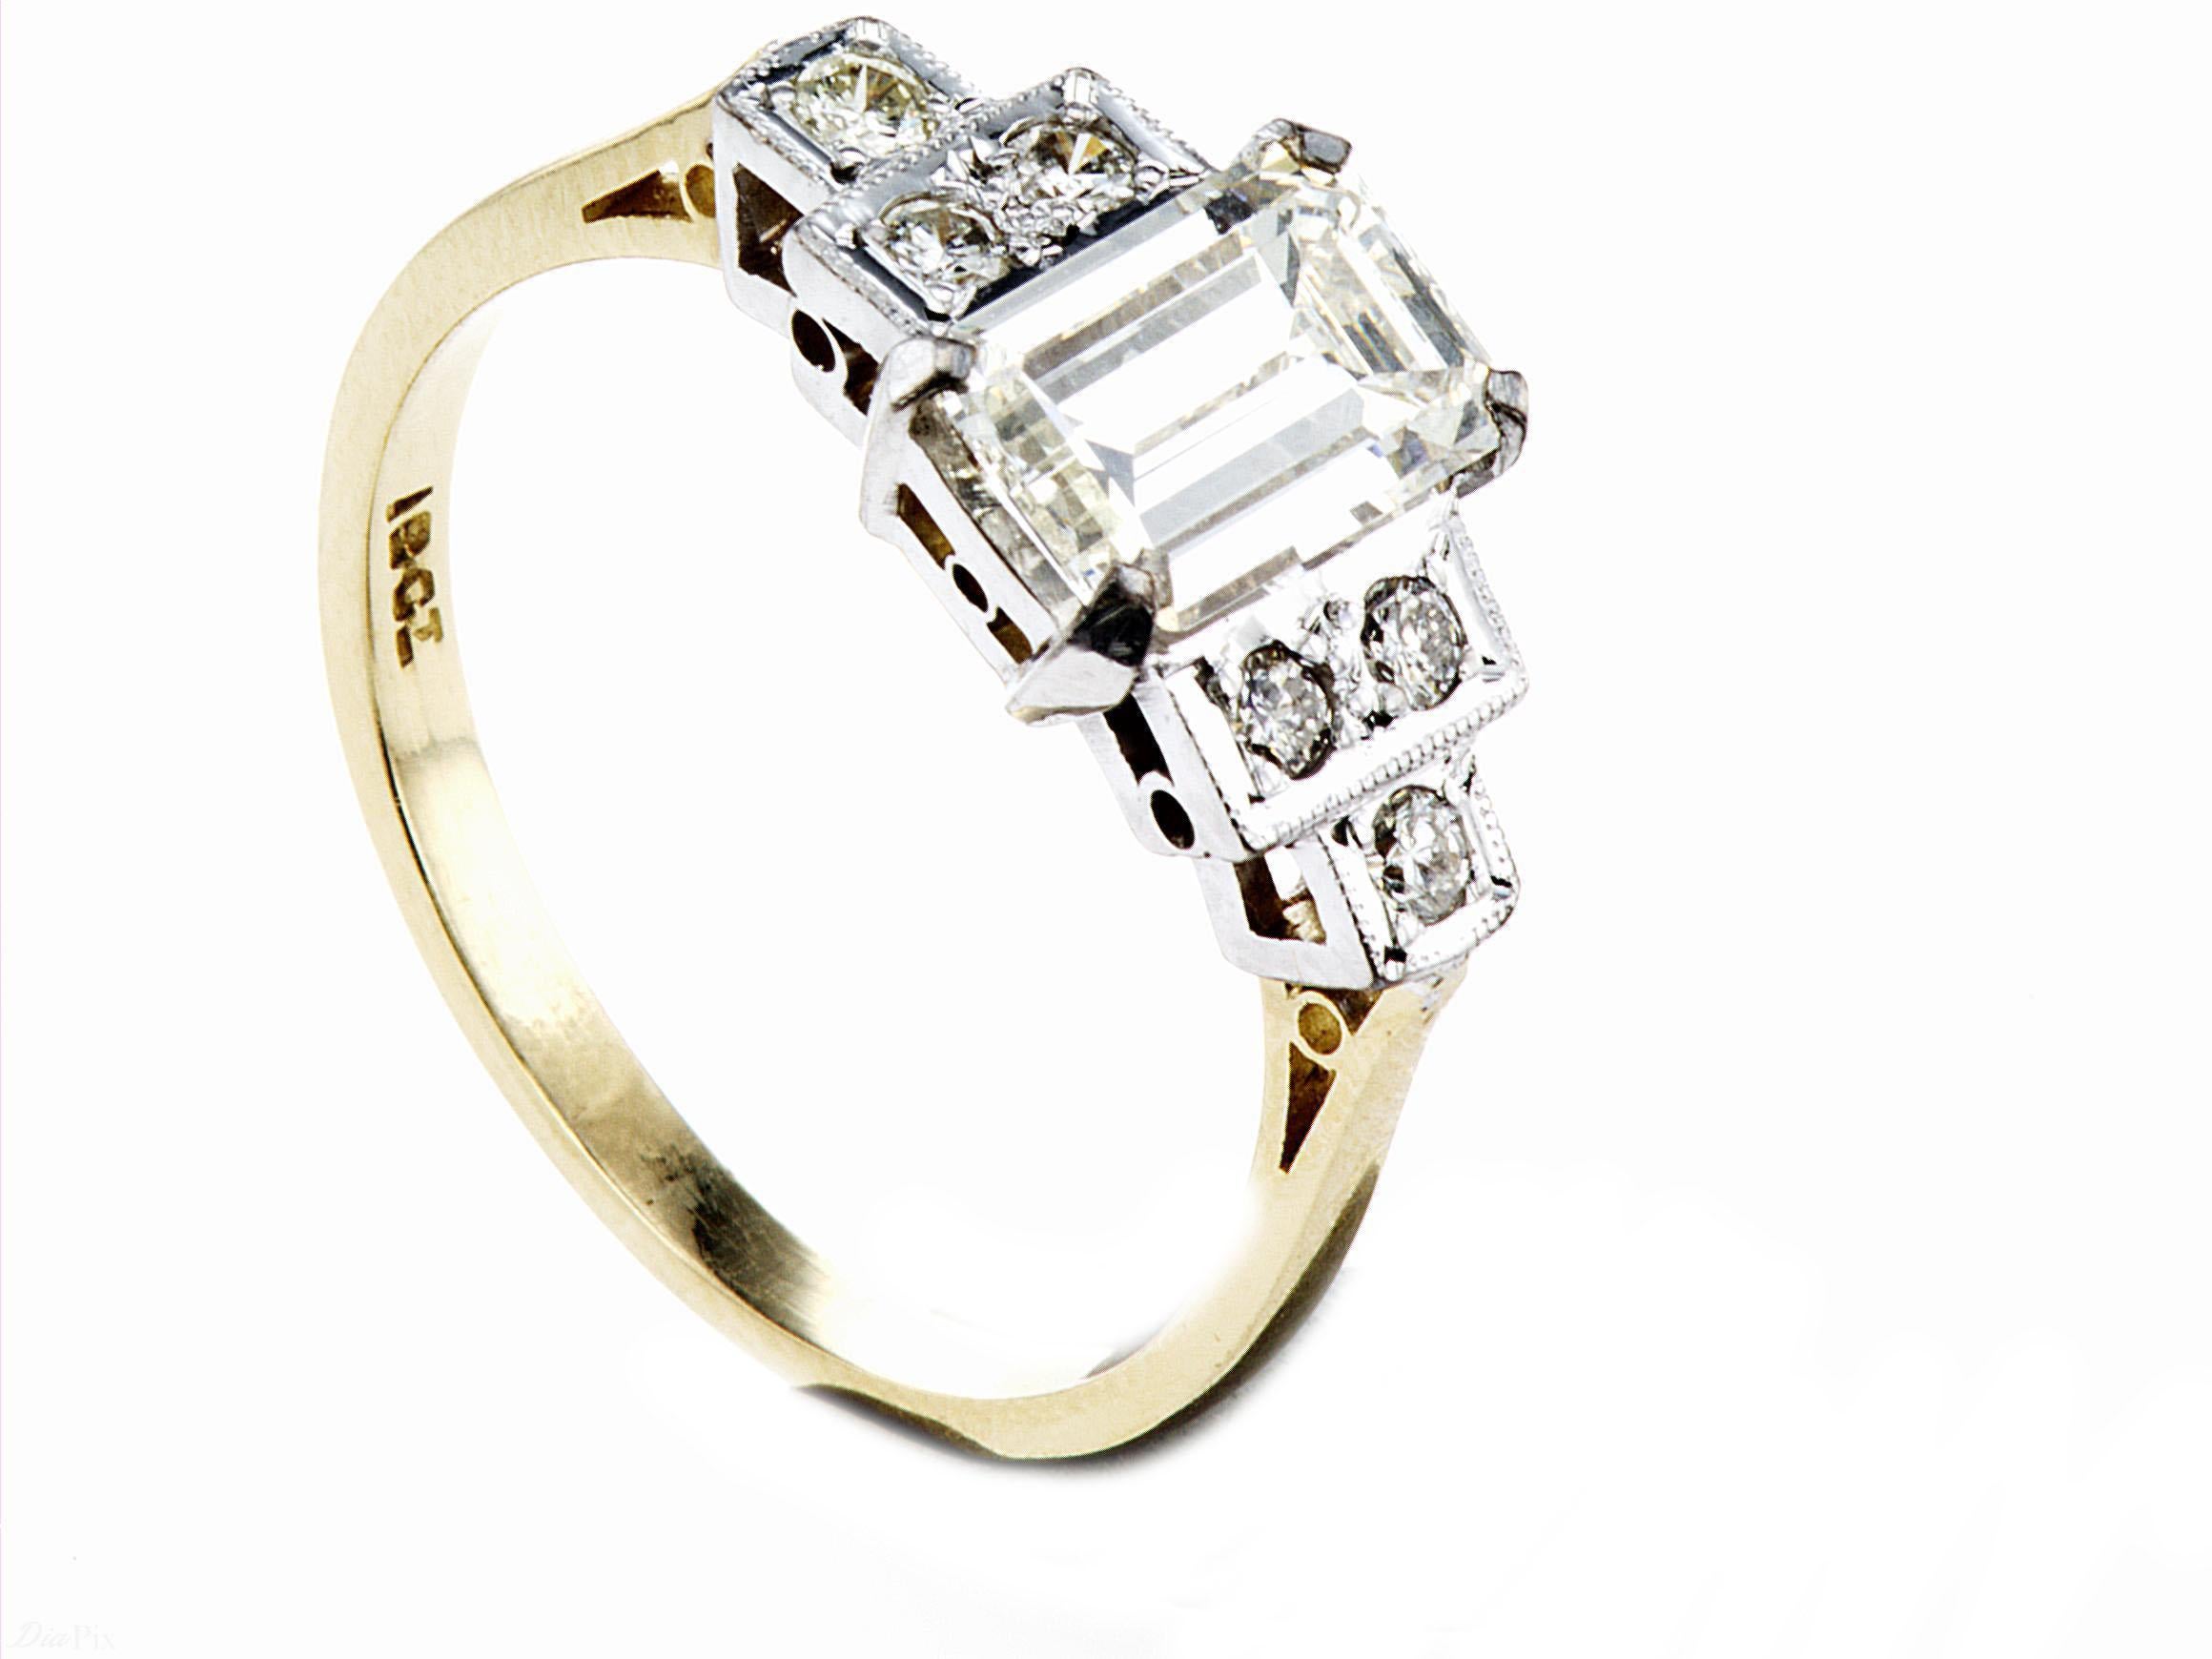 Emerald-Cut Natural Diamond Ring The central diamond measures 8.78mm x 5.64mm x 3.51mm Weighing 1.50ct. GradedI IJ VS1.
The supporting shoulder stone 3 to each side weigh .12ct also I/J VS. The diamonds mounted in a platinum setting to an 18ct